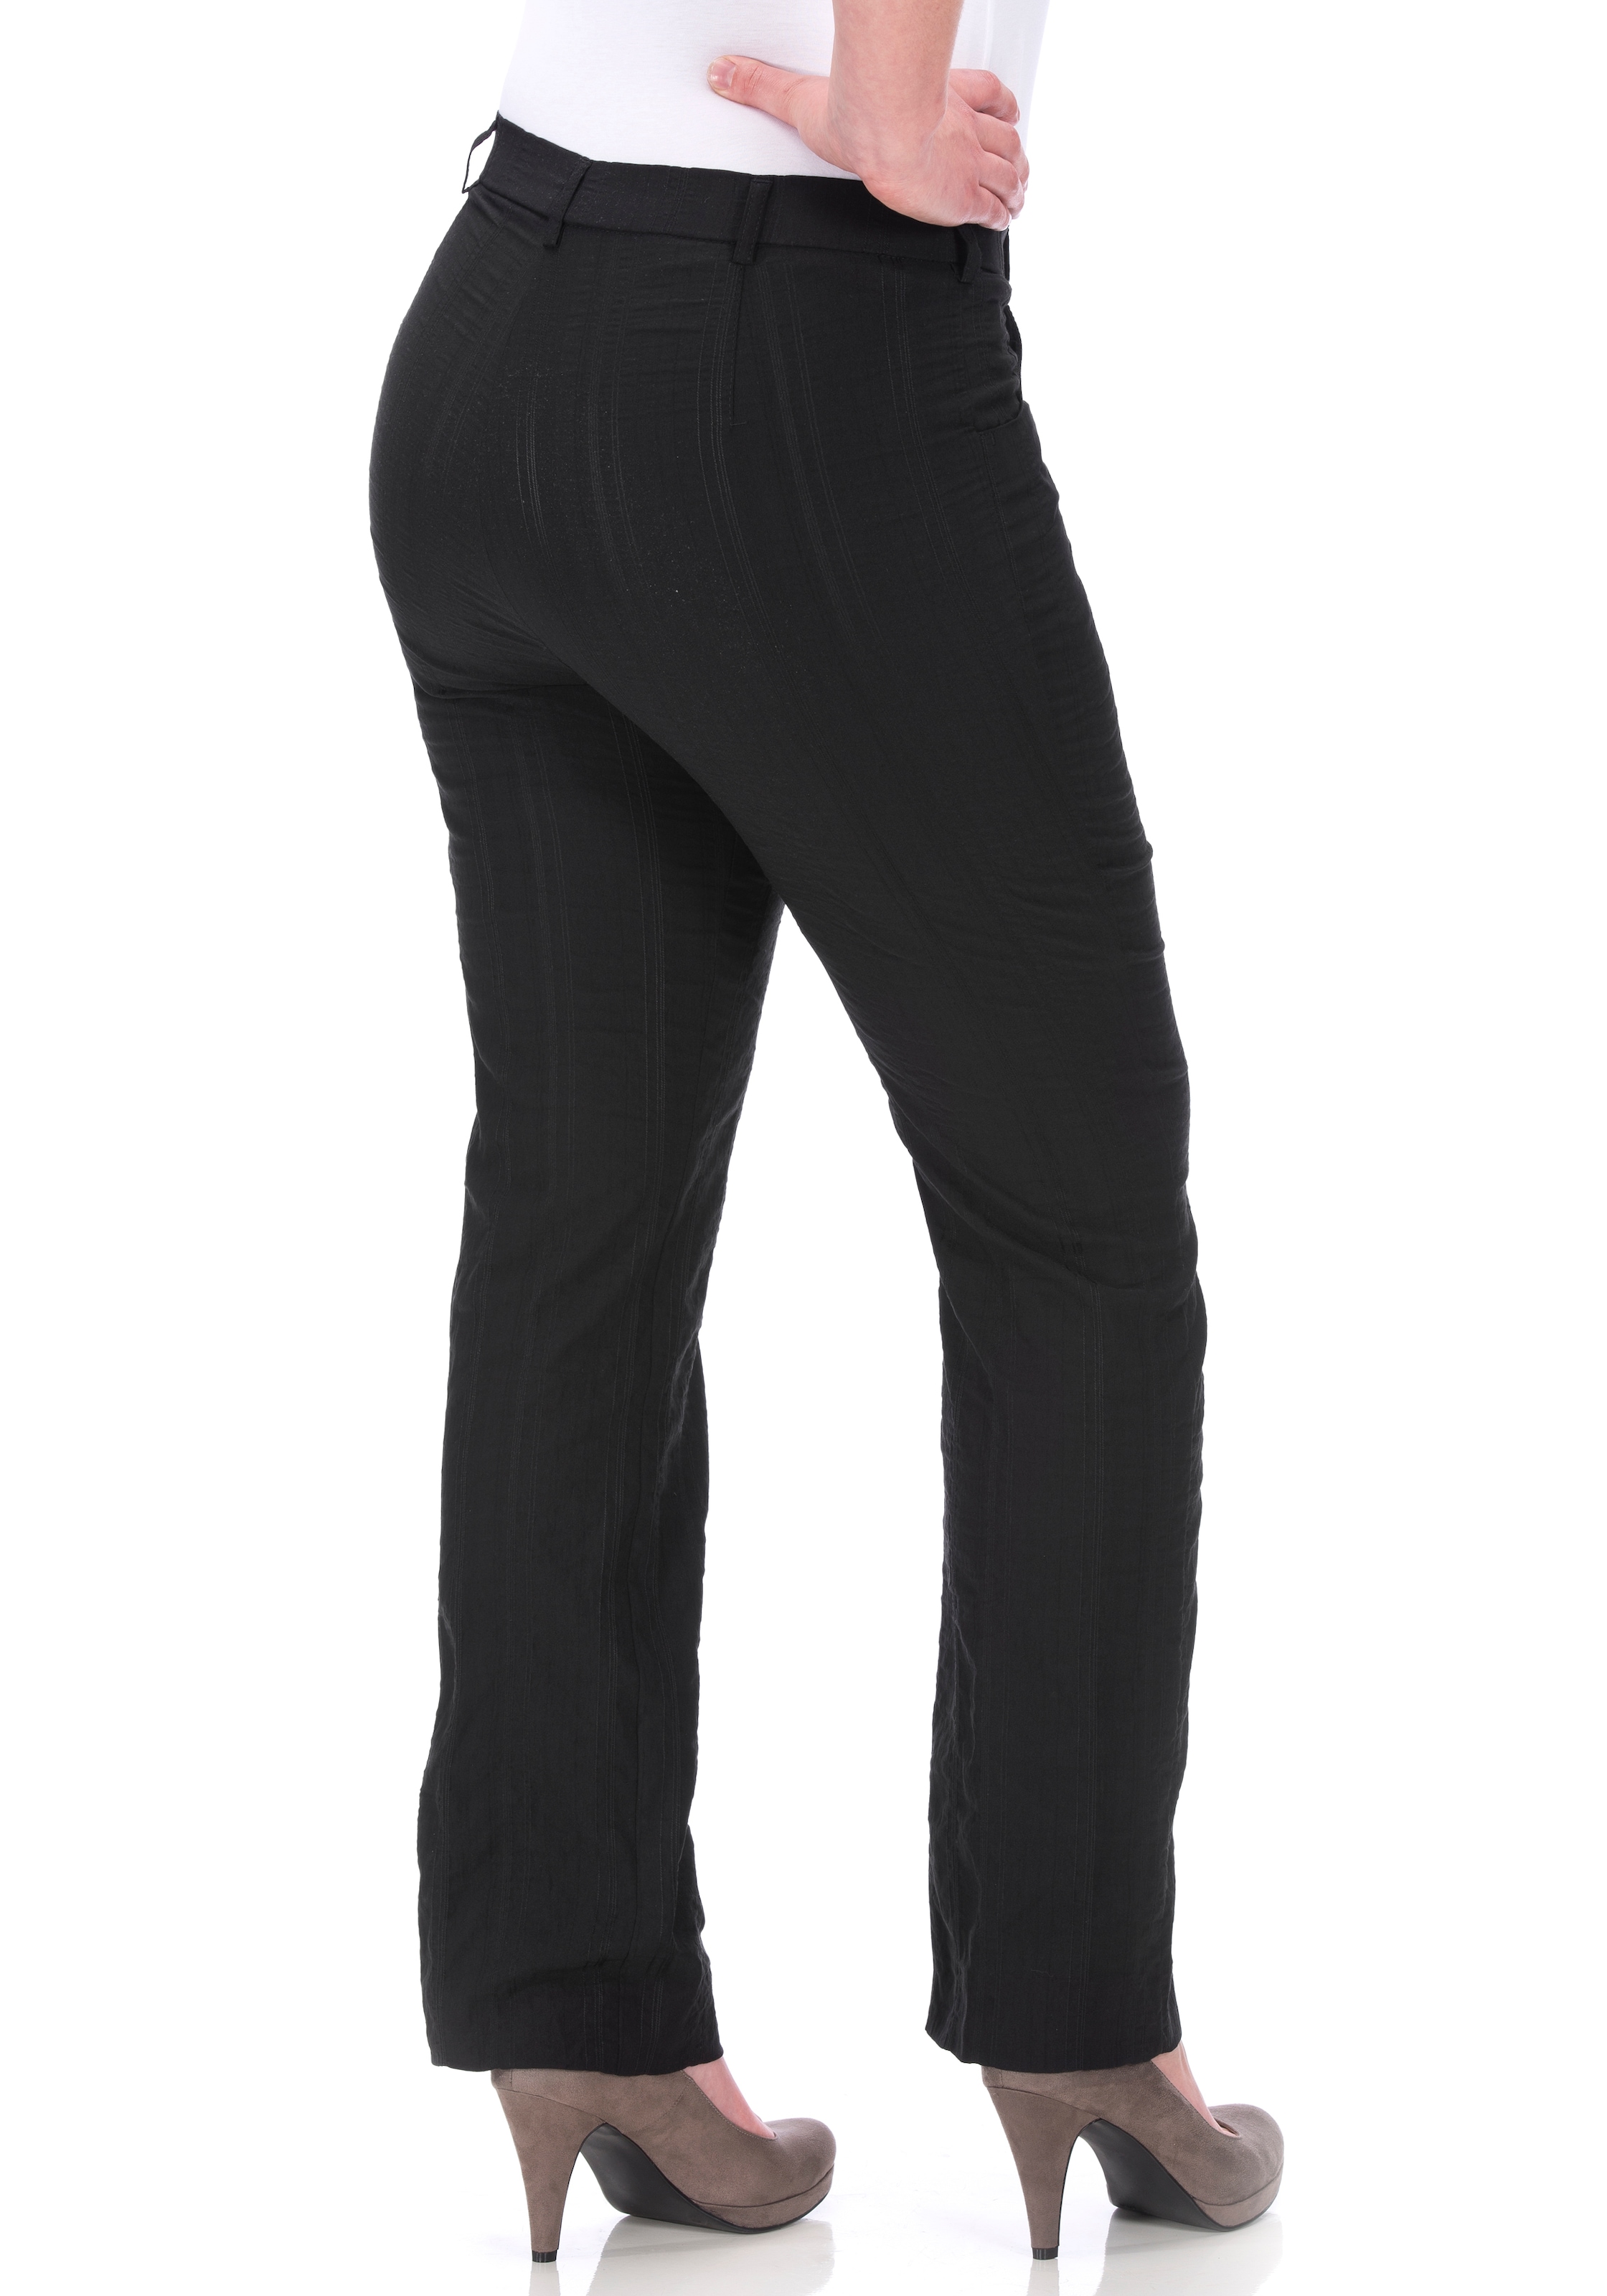 Passform »Bea«, Quer-Stretch KjBRAND ♕ optimale Stoffhose in bei